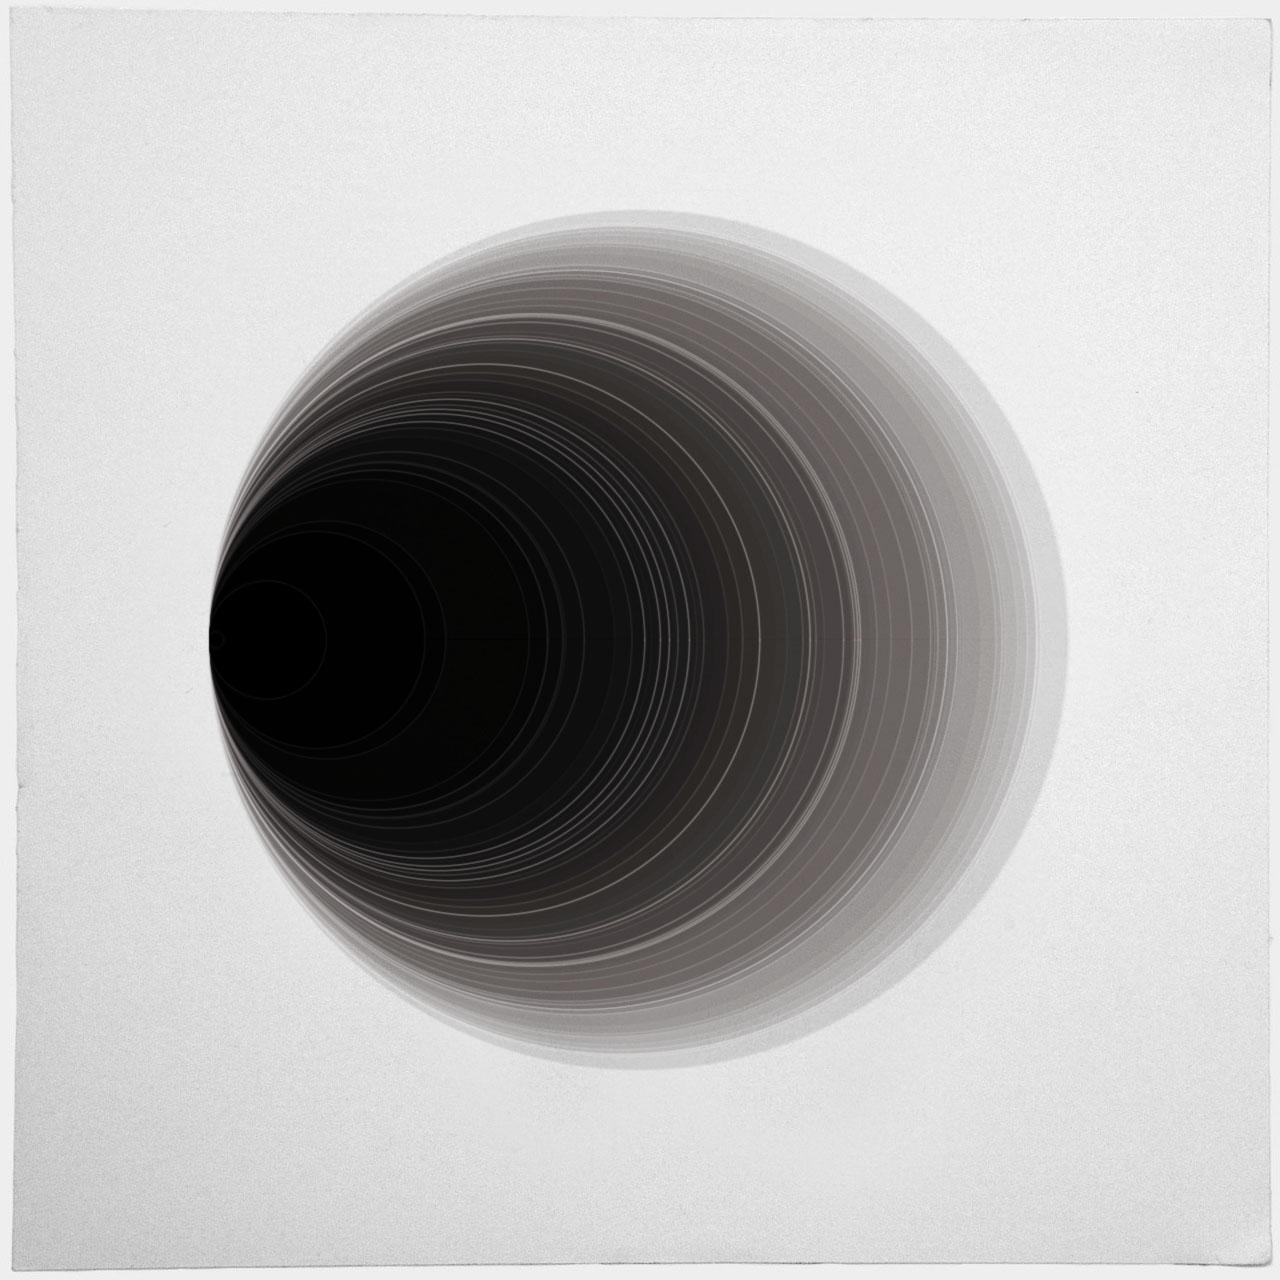 #generative #art and design made with #code (#processing) at http://thedotisblack.tumblr.com http://t.co/pHIiak0r3E